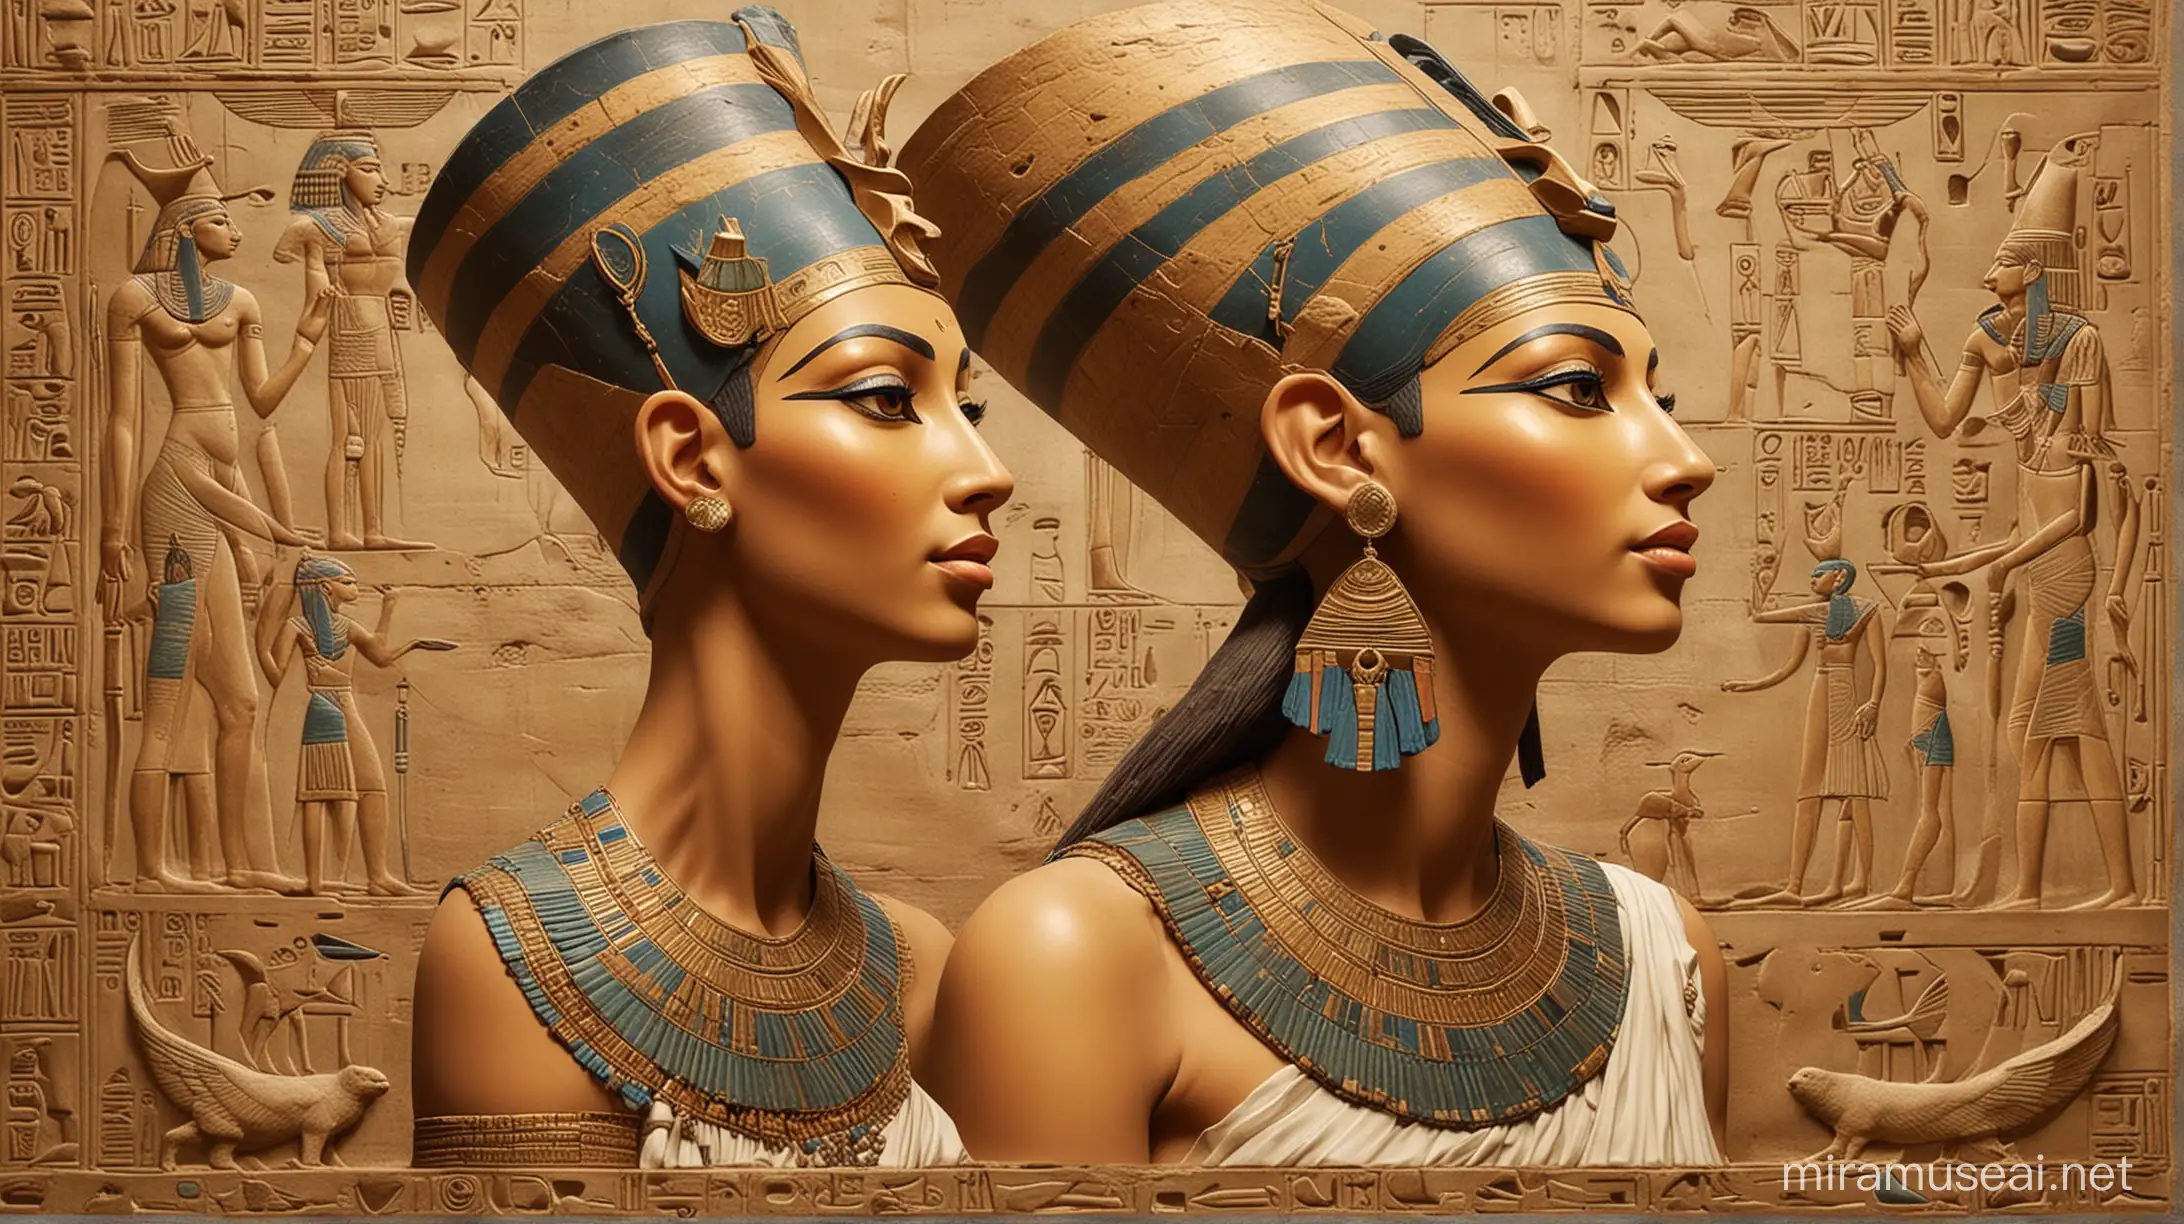 Majestic Portraits of Cleopatra and Nefertiti Ancient Egypts Iconic Queens and Their Timeless Legacies